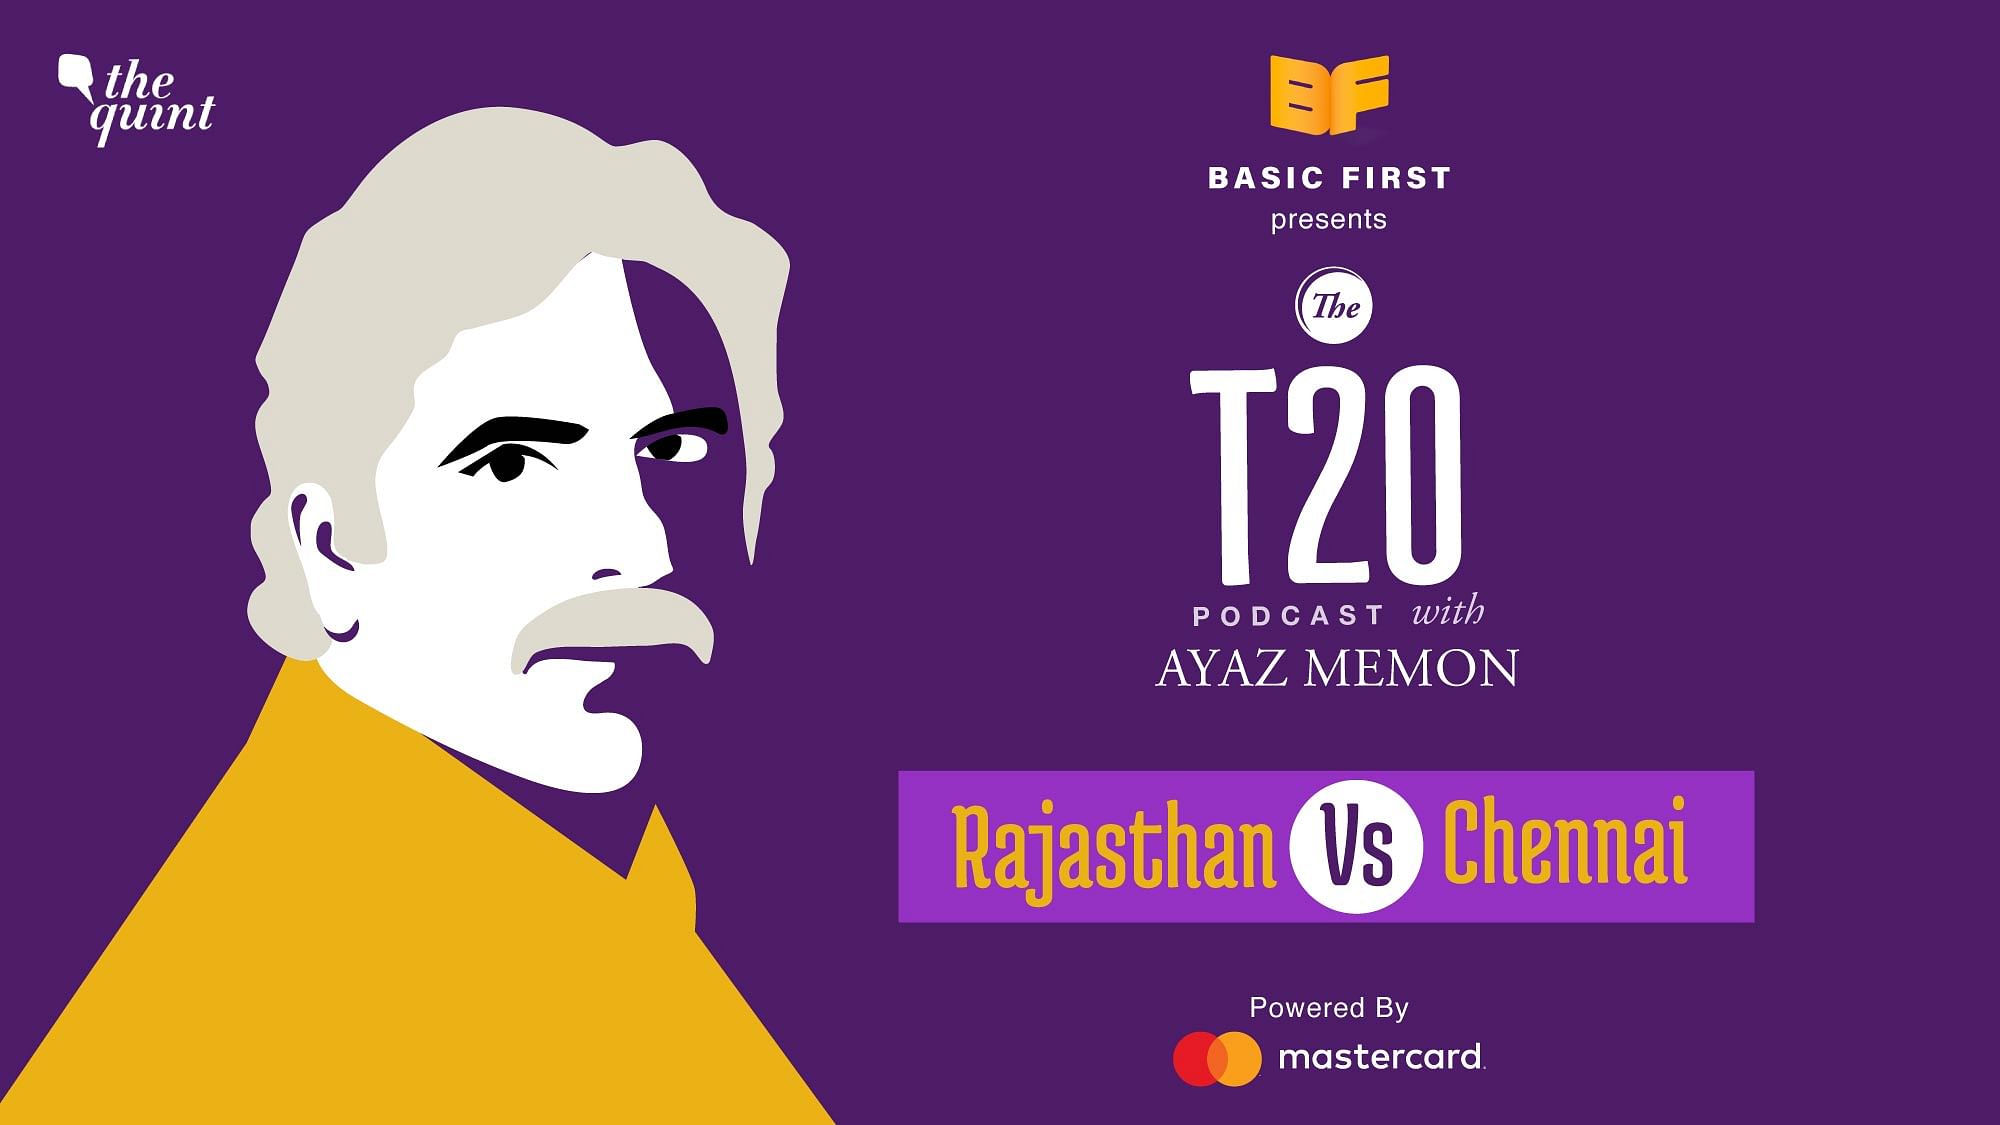 On episode 4 of The T20 Podcast with Ayaz Memon, we discuss Chennai’s tame loss to Rajasthan.